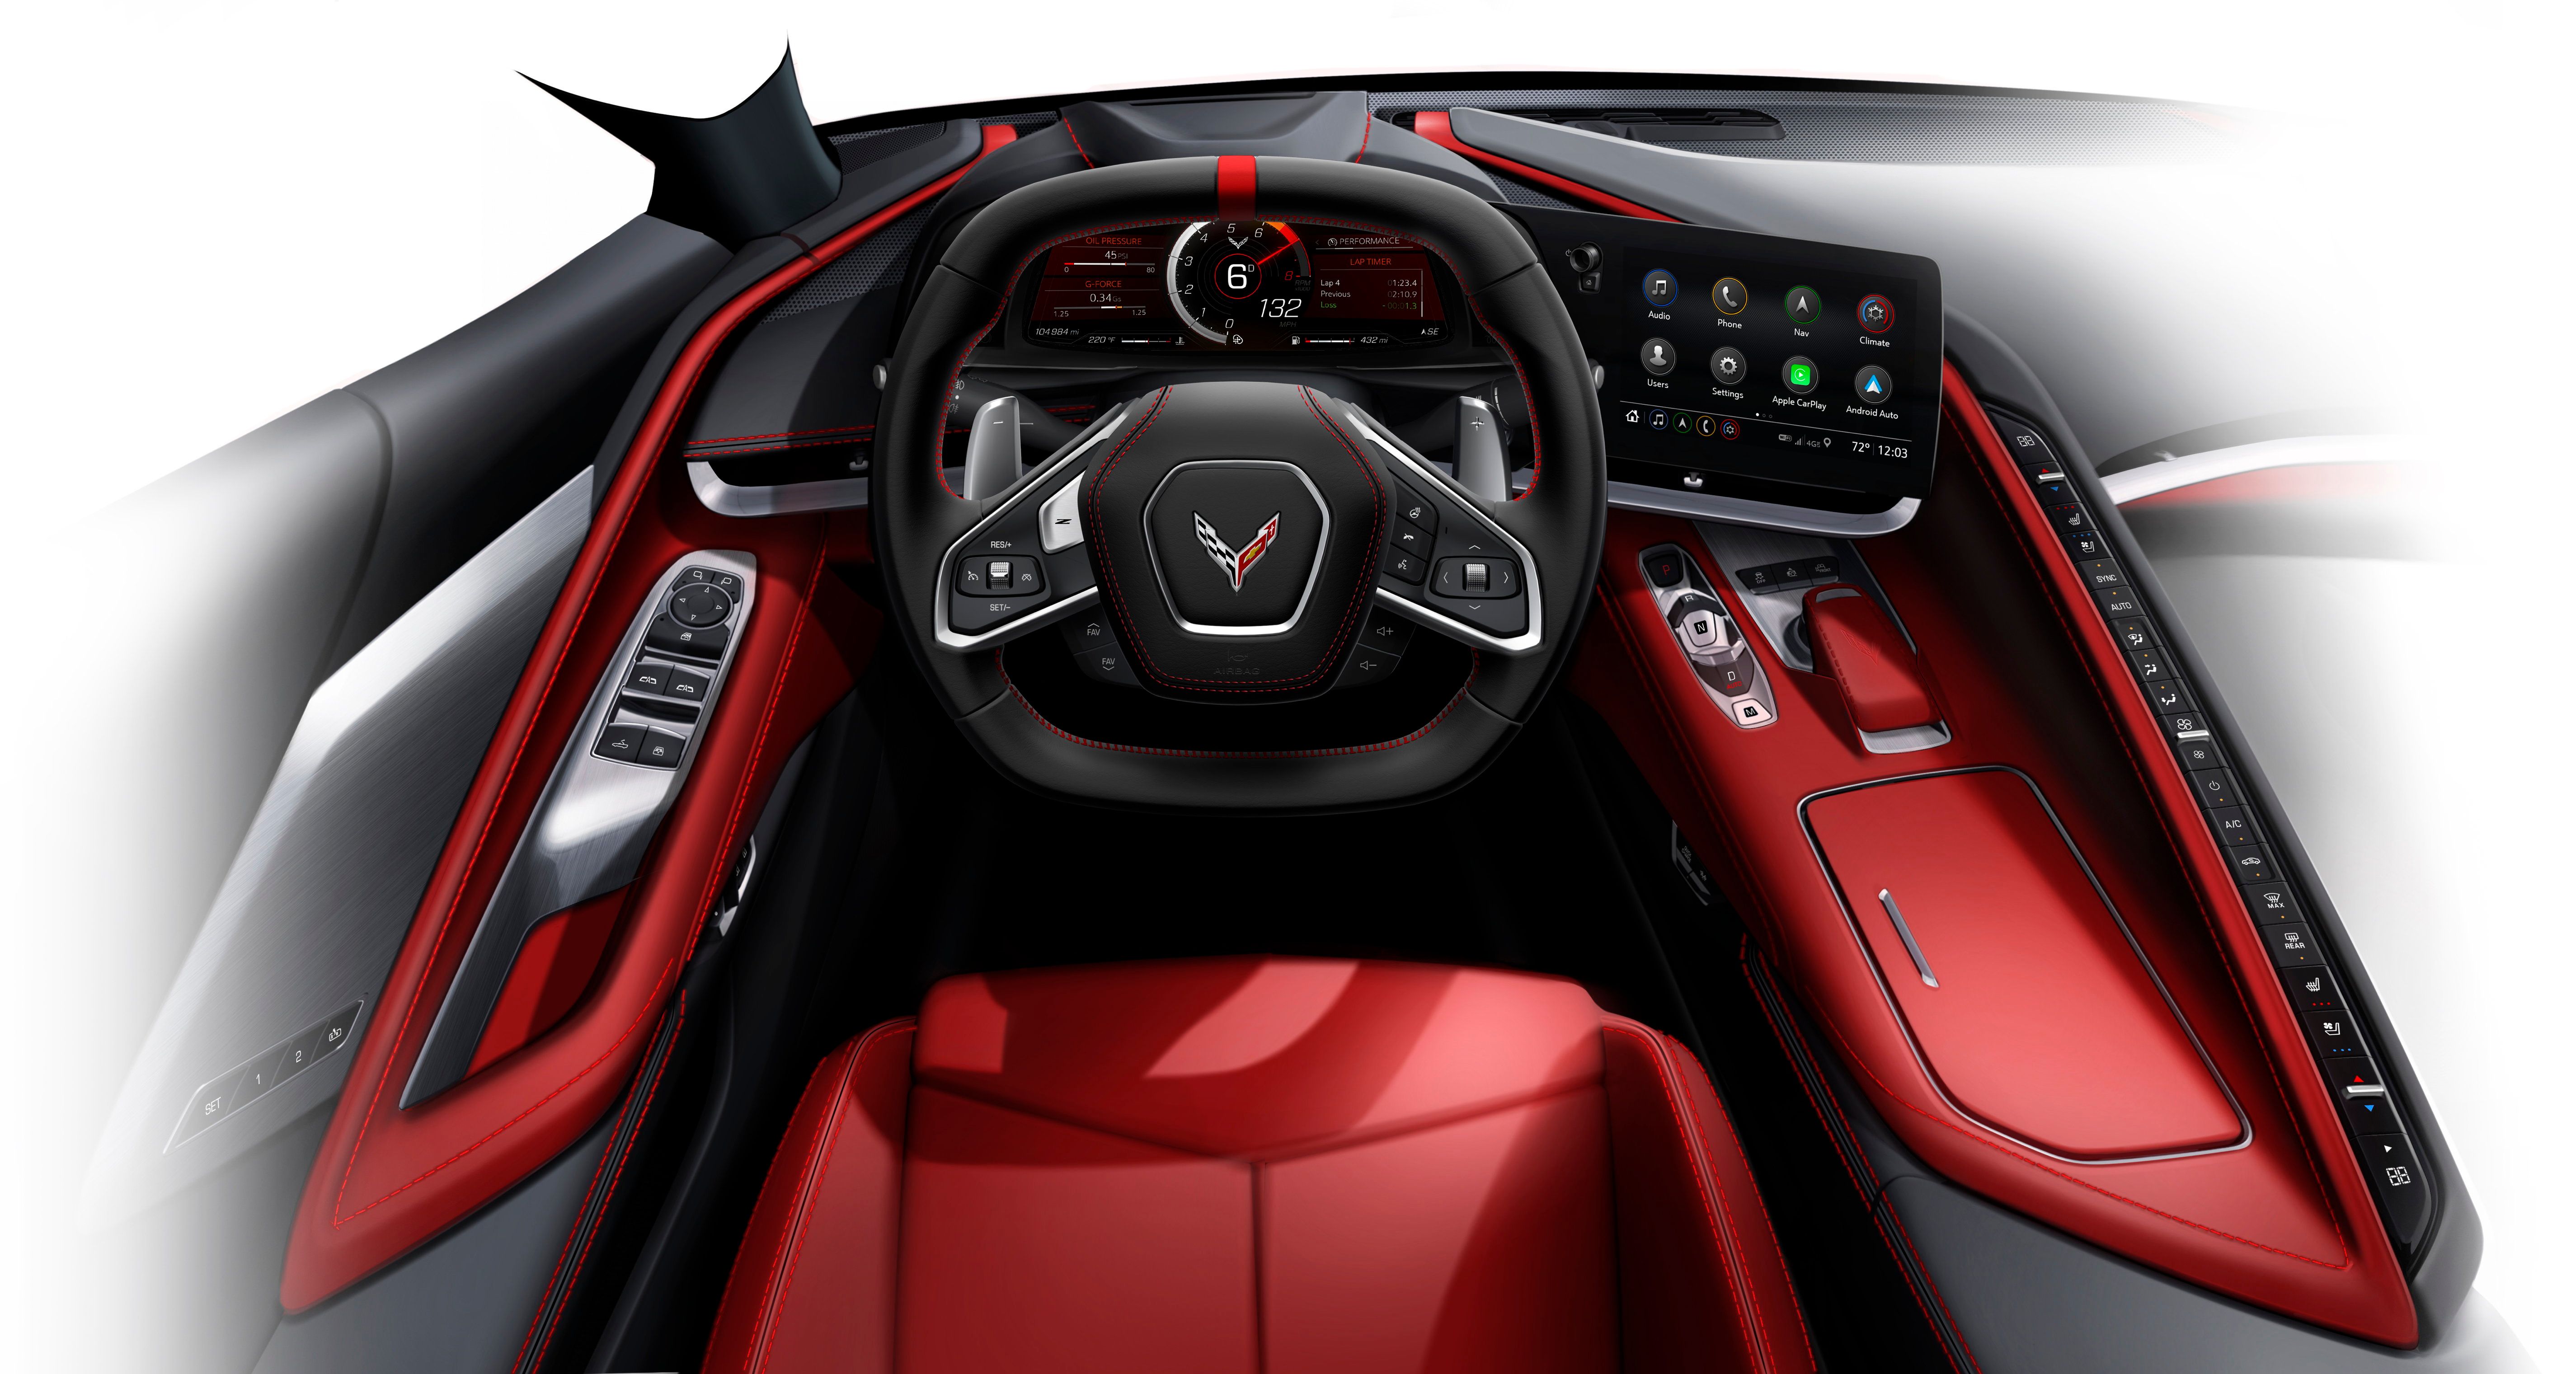 Wait, the All-New 2020 Chevrolet Corvette C8 is Priced How Much?!